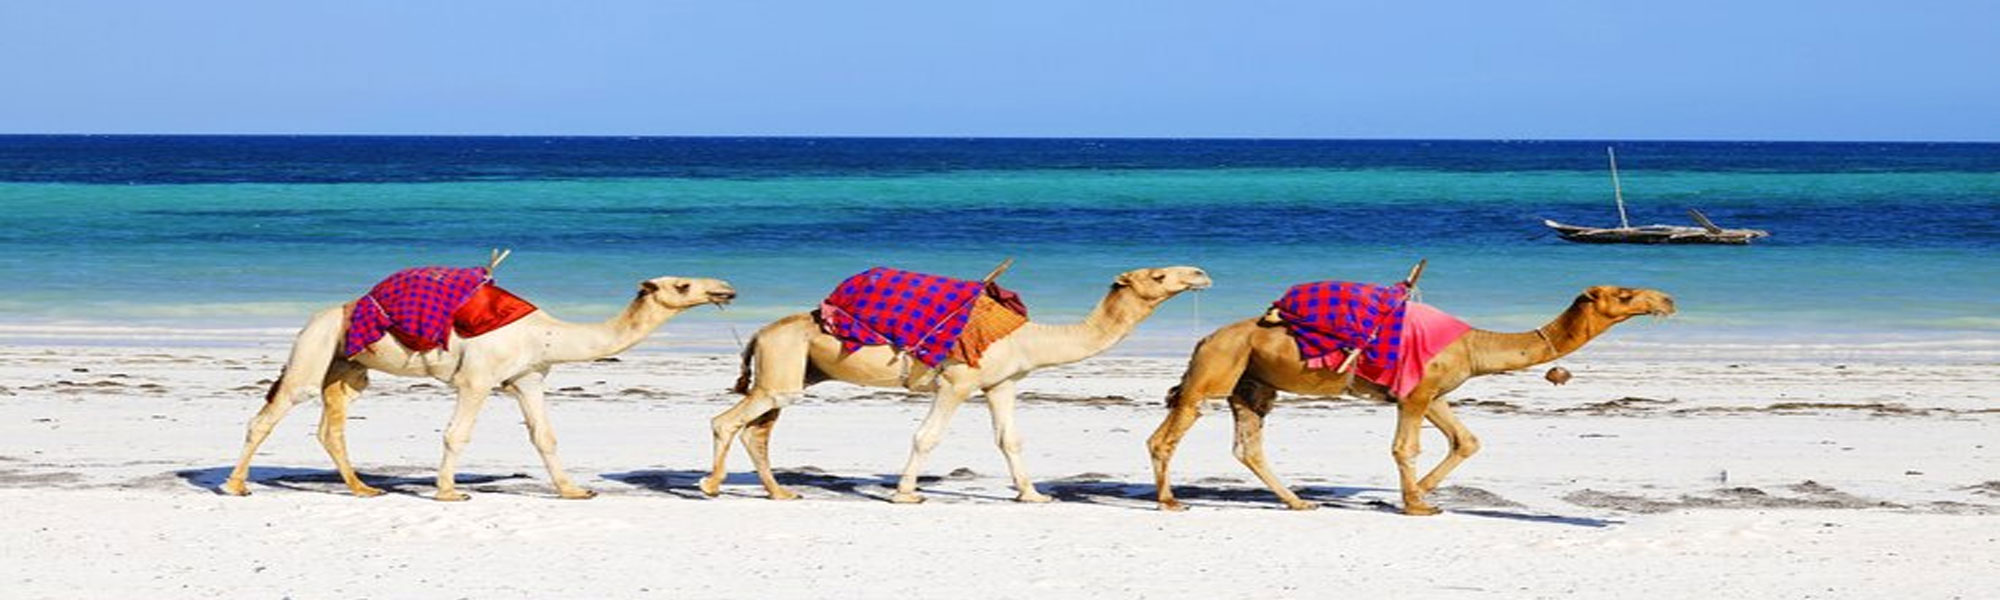 Goa Tours in India with Camel Safari Tours in Rajasthan